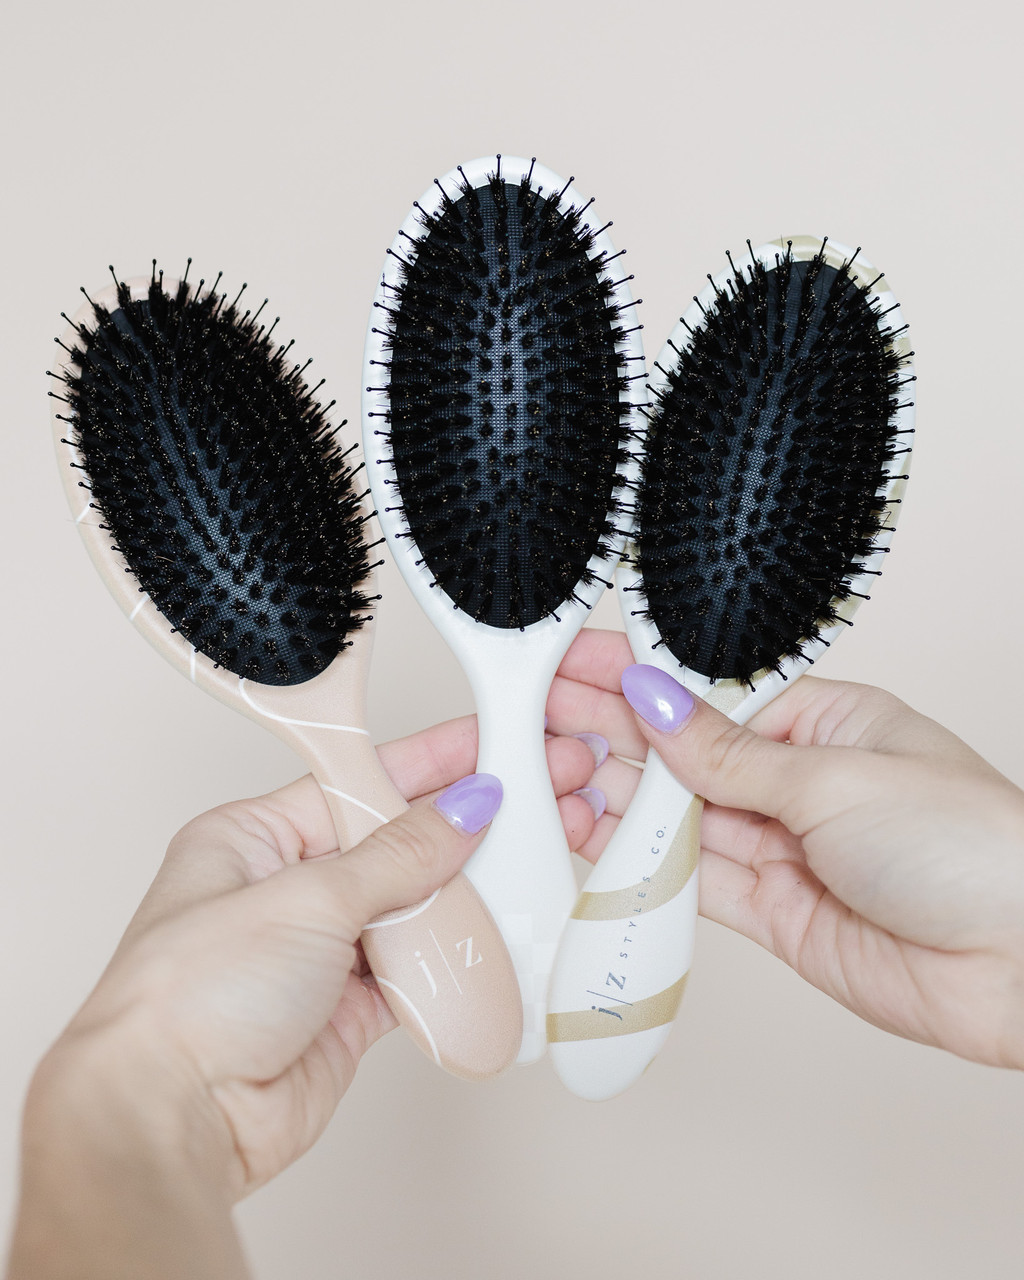 Best Brushes to Use on Hair Extensions – Wicked Roots Hair™